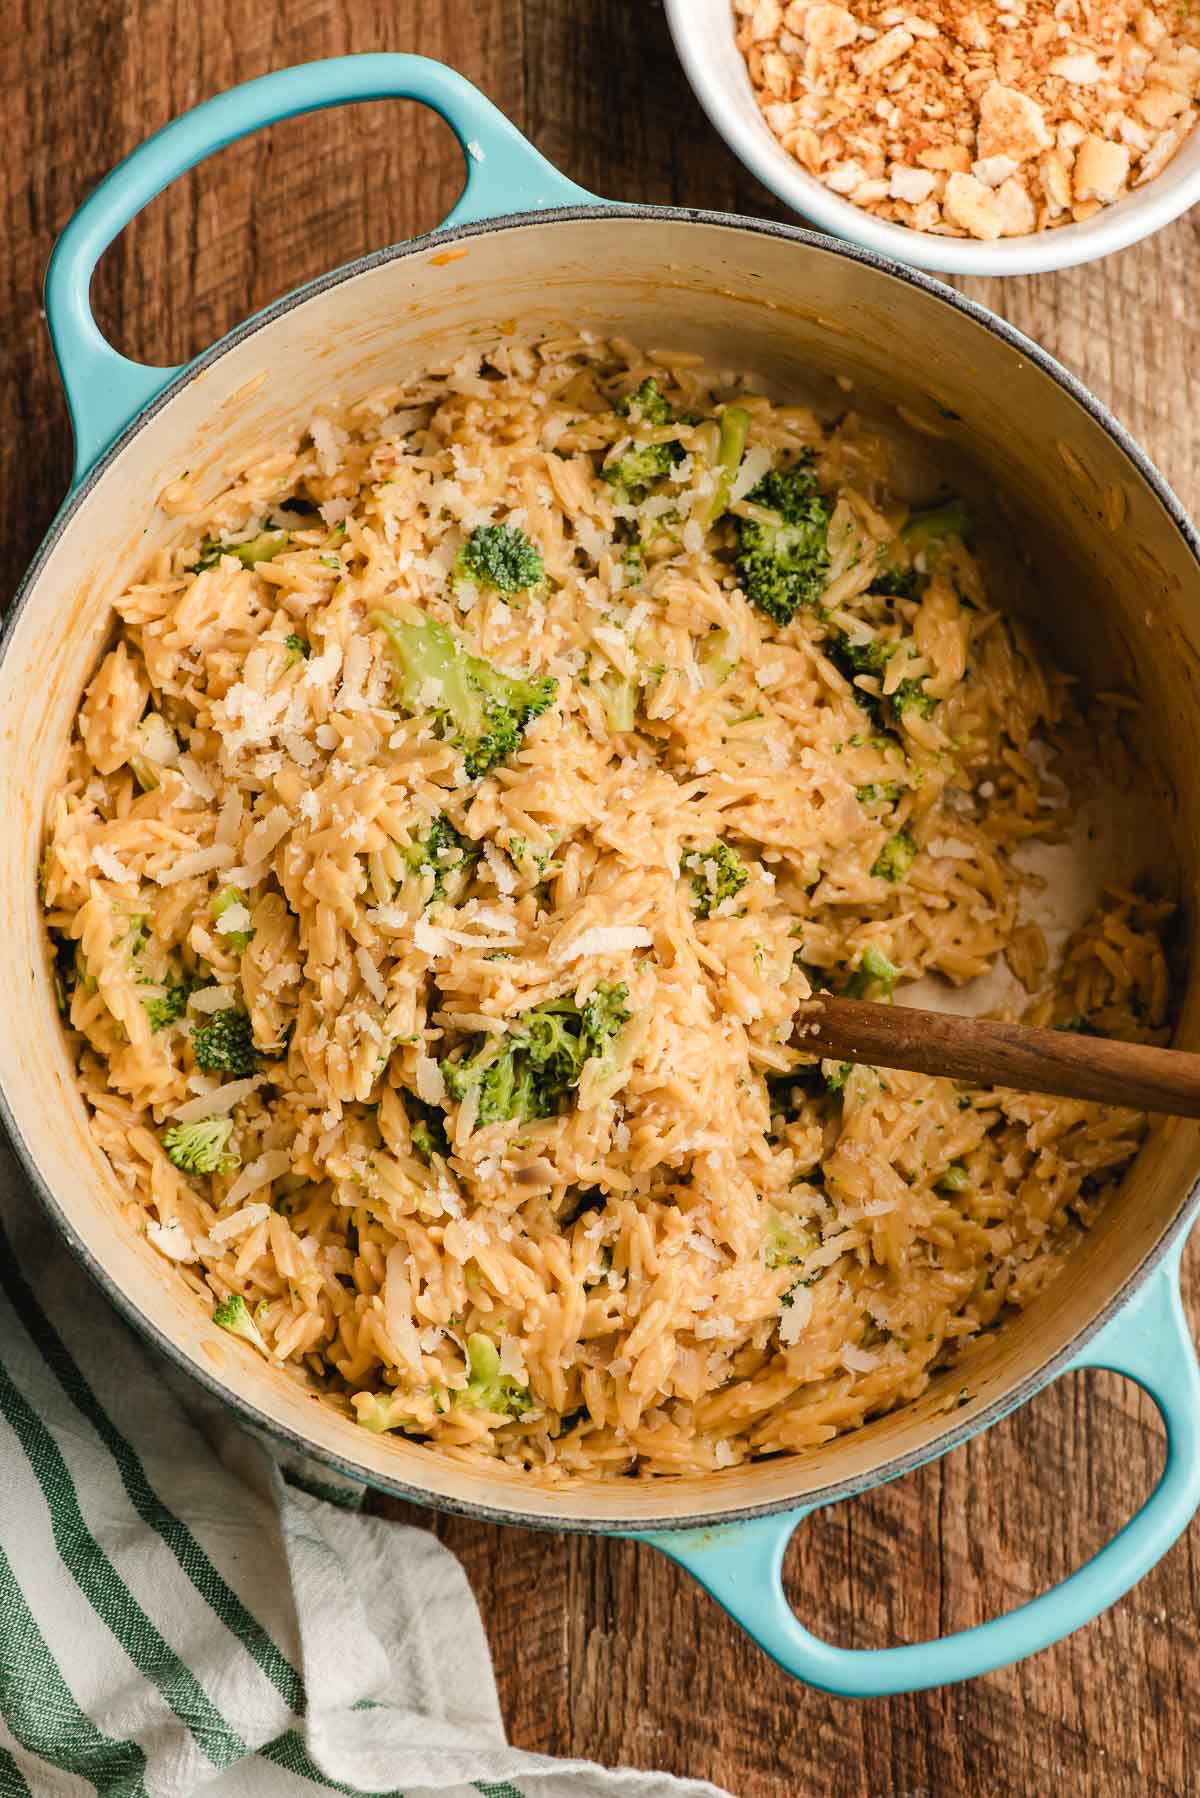 Broccoli cheddar orzo in a Dutch oven with a wooden spoon.